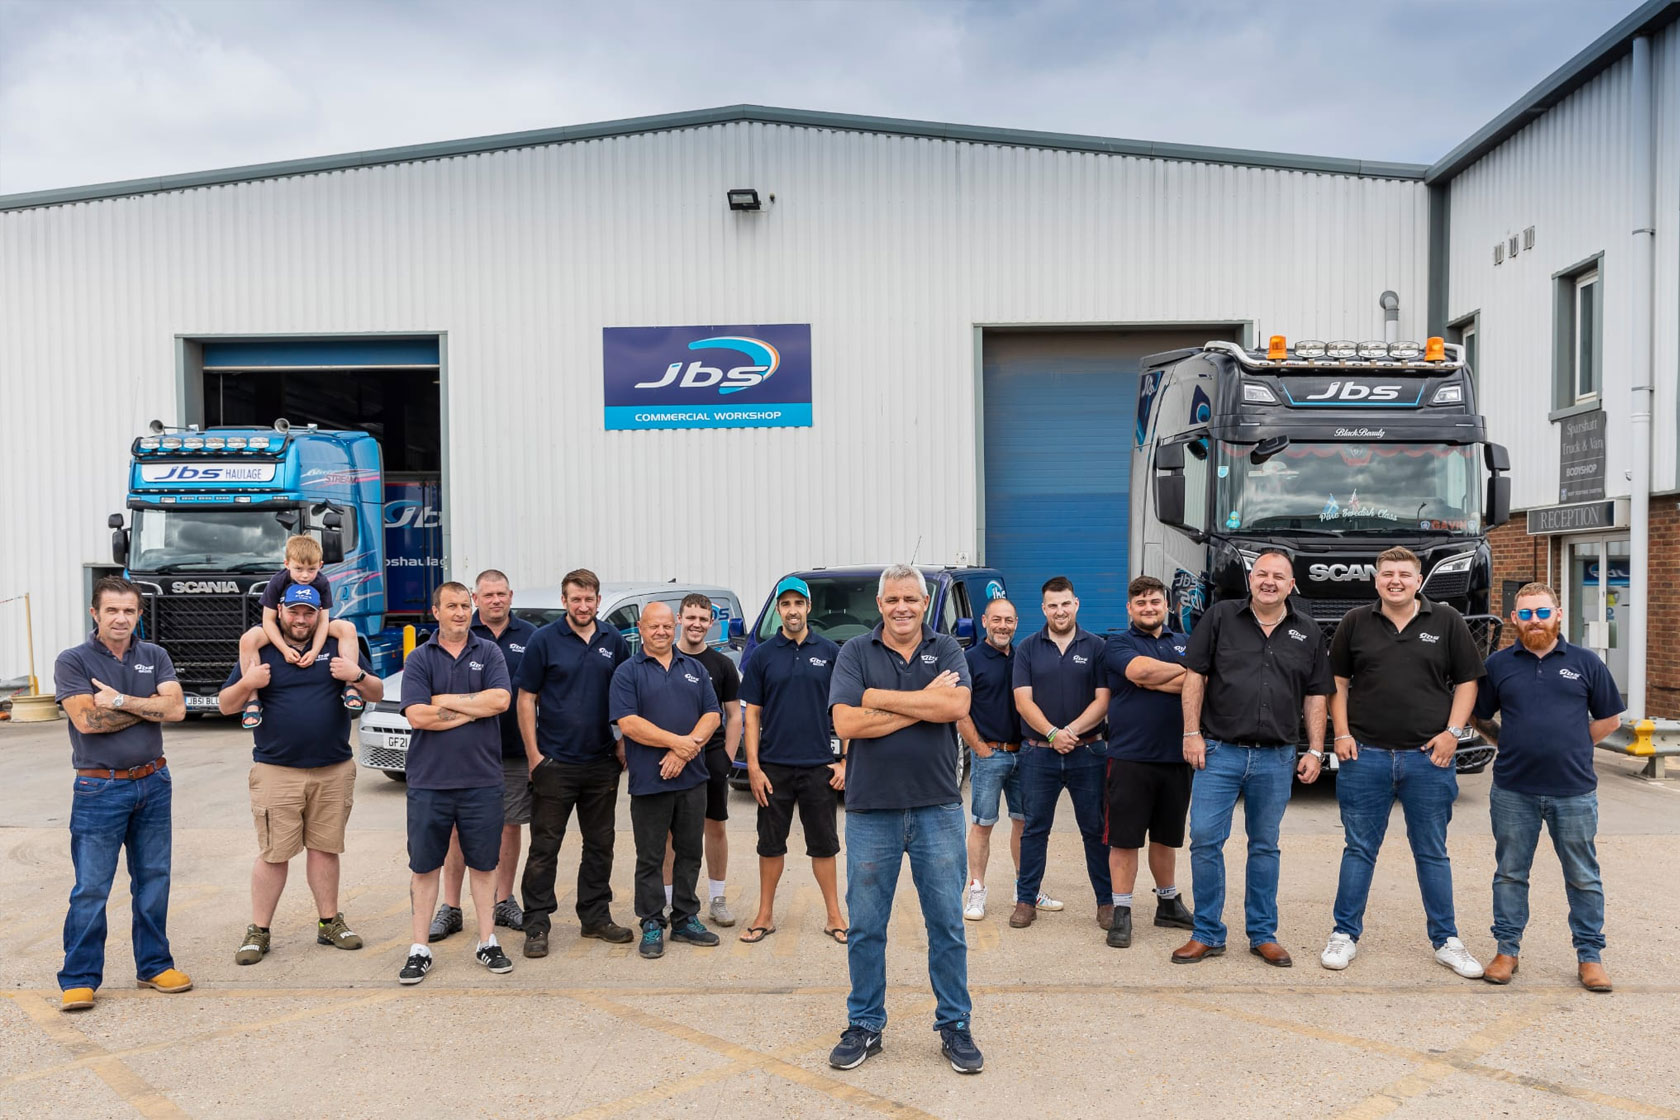 All of our team in a line stood next to each other posing for a photo i n front of the JBS workshop